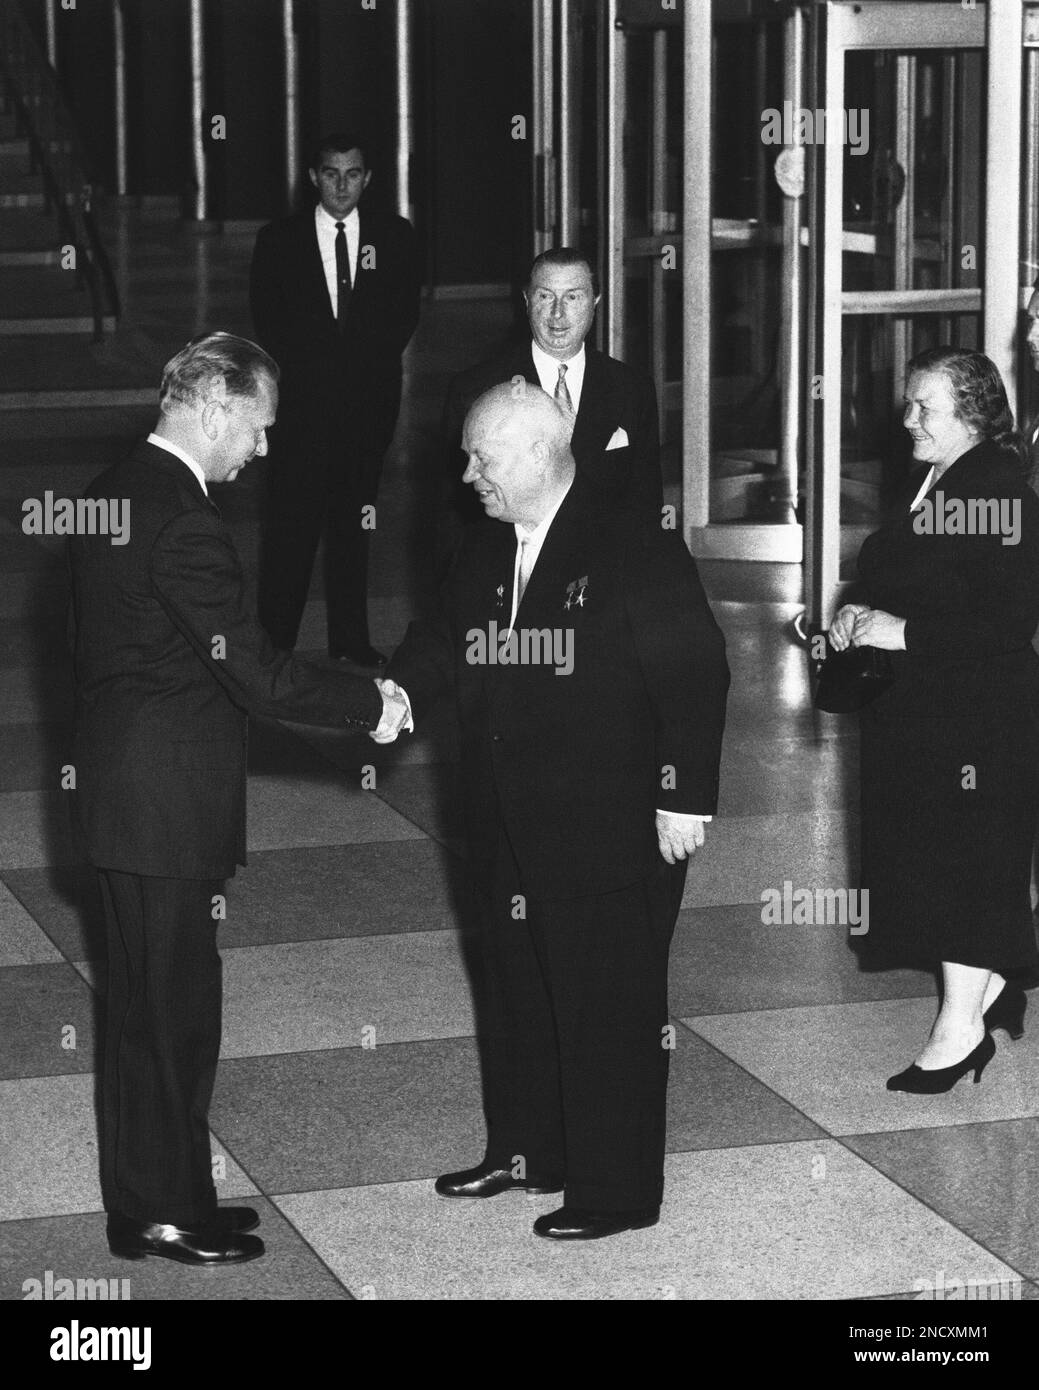 Under the strict definitions of Untied Nations' protocol, Soviet Premier Nikita  Khrushchev didn't qualify for this personal greeting in the U.N. by  Secretary General Dag Hammarskjold, Nov. 24, 1959, but Russia had